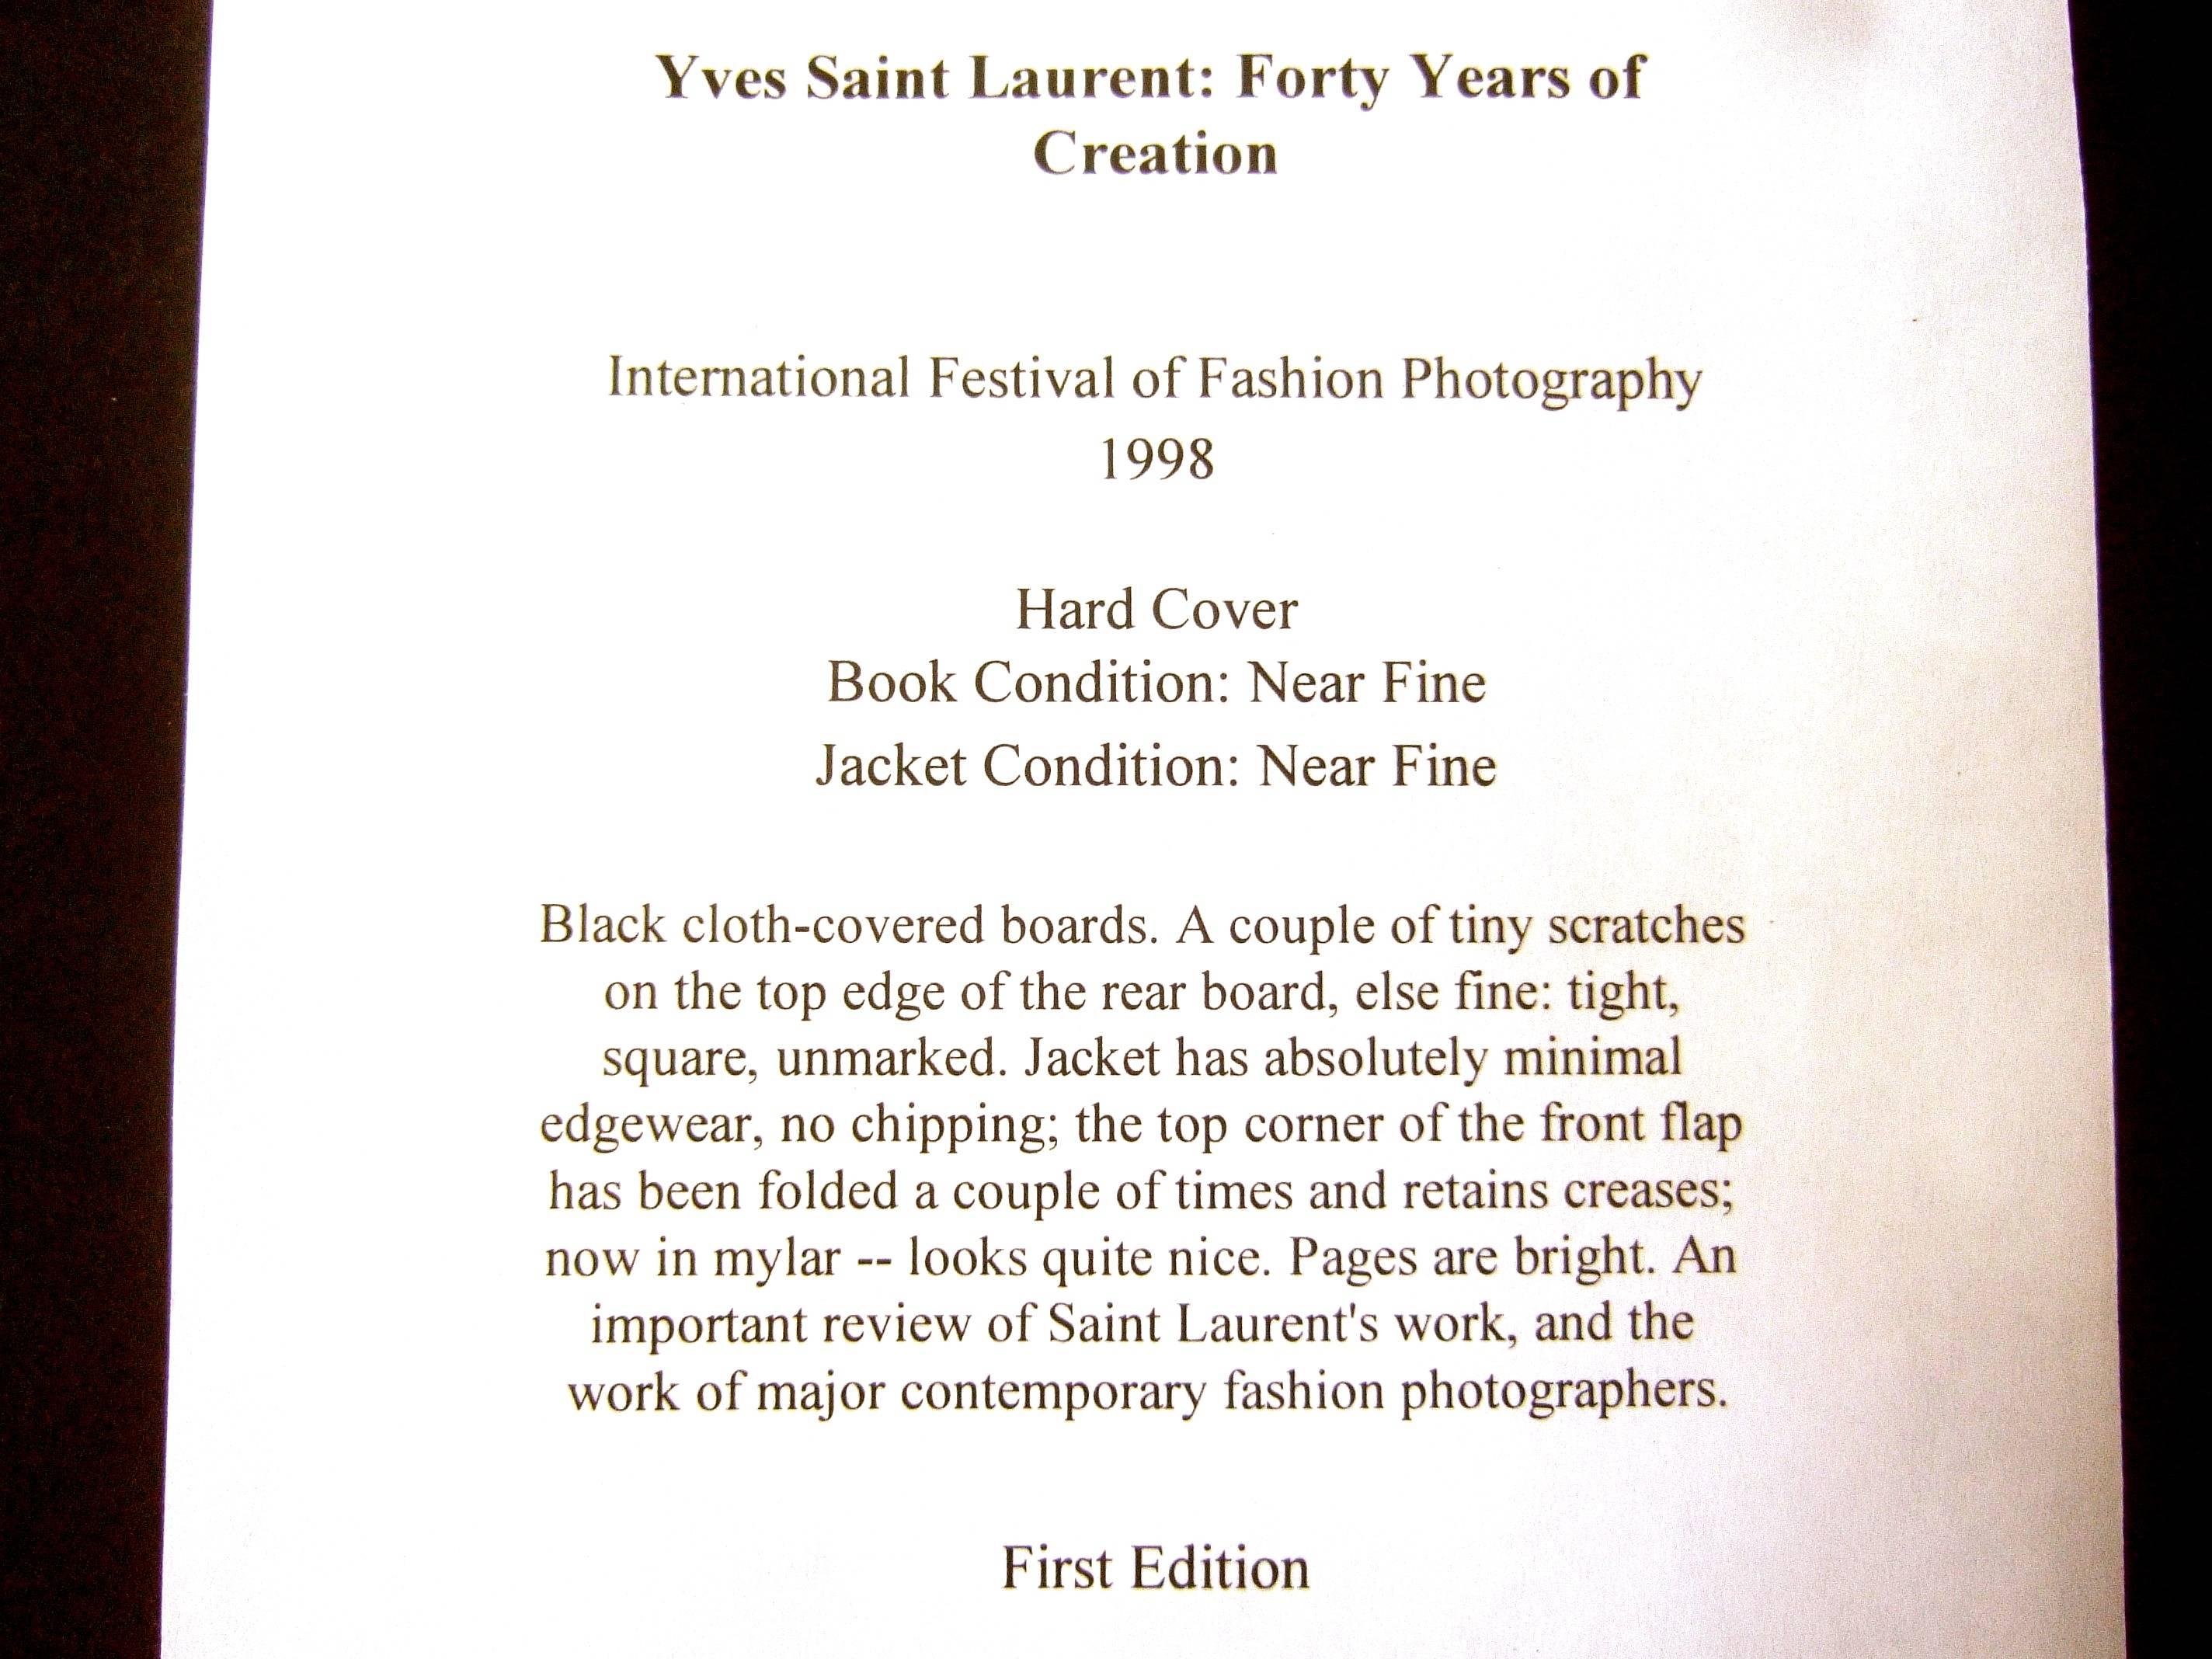 Women's or Men's Yves Saint Laurent Rare First Edition Hard Cover Book Forty Years of Creation 